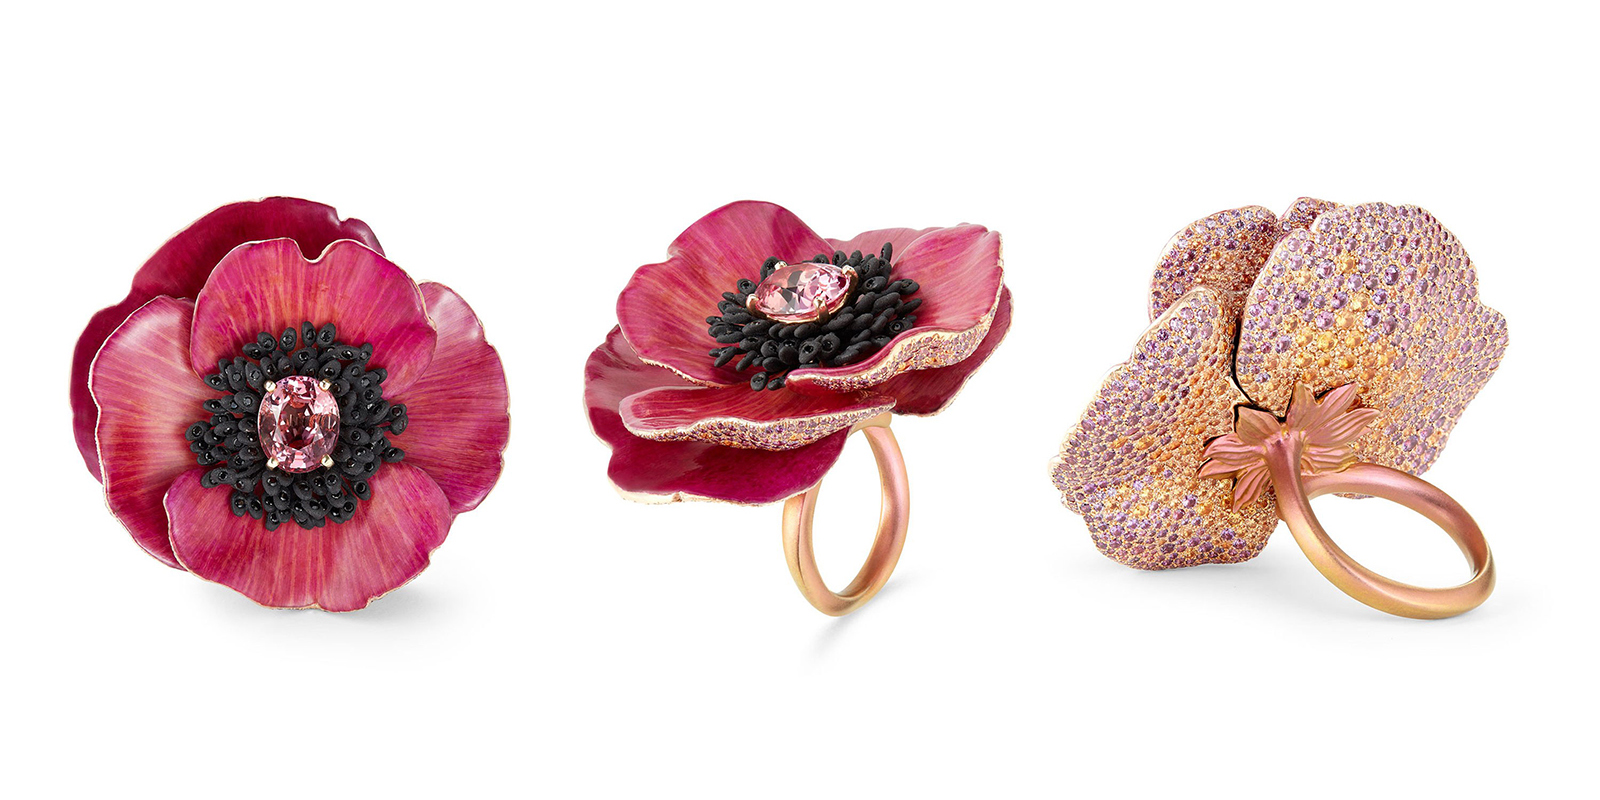 Boucheron 'Eternal Flowers' collection 'Pivione Avis Varner' ring with 4.16ct Padparadscha sapphire, spinels, yellow and violet sapphires in titanium